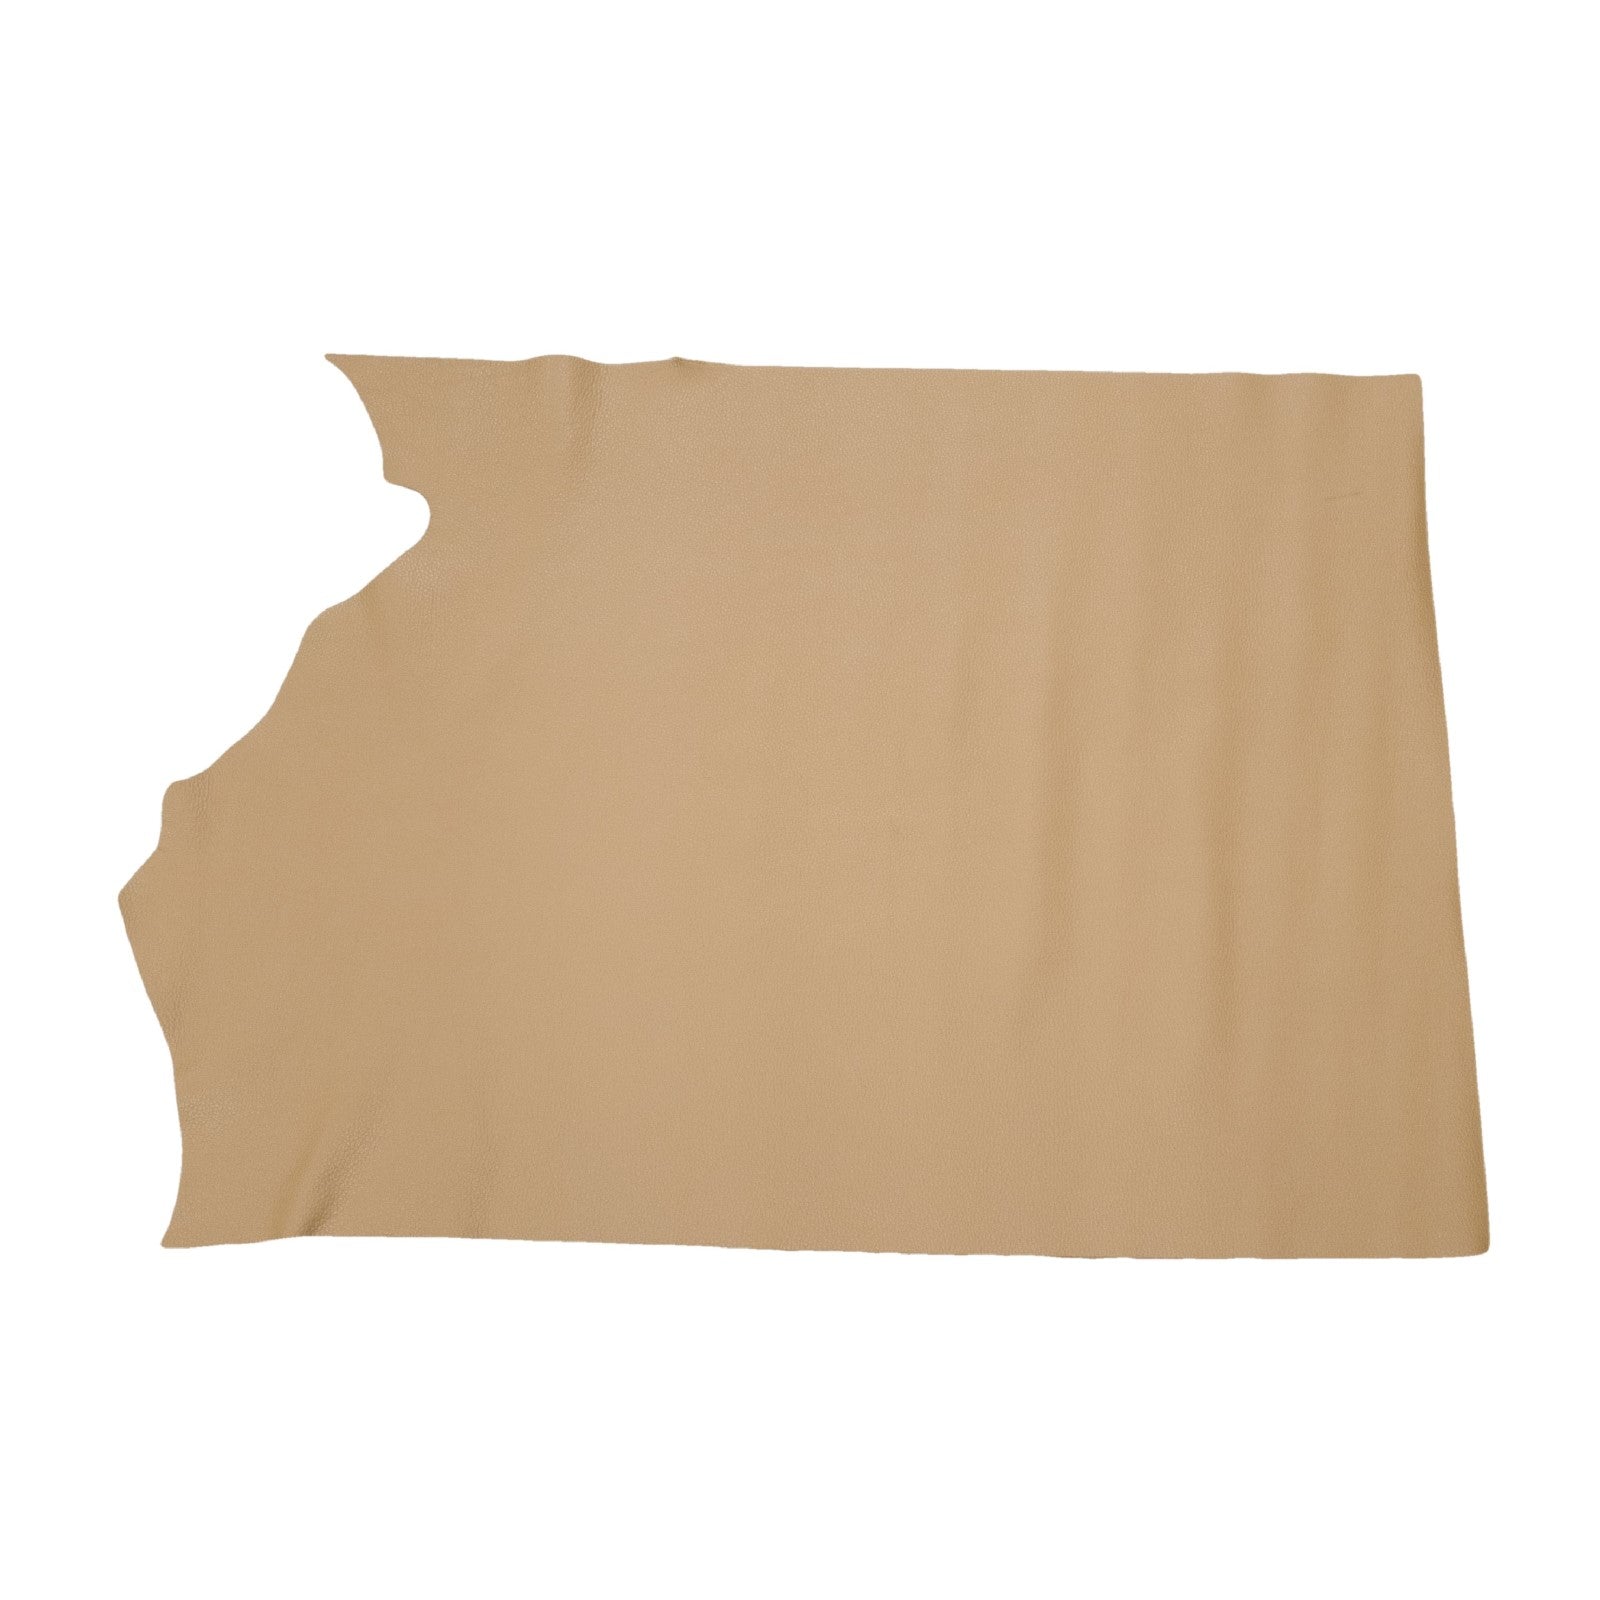 Cleveland Cappuccino Brown Tried n True 3-4 oz Leather Cow Hides, Middle Piece / 6.5-7.5 Square Foot | The Leather Guy